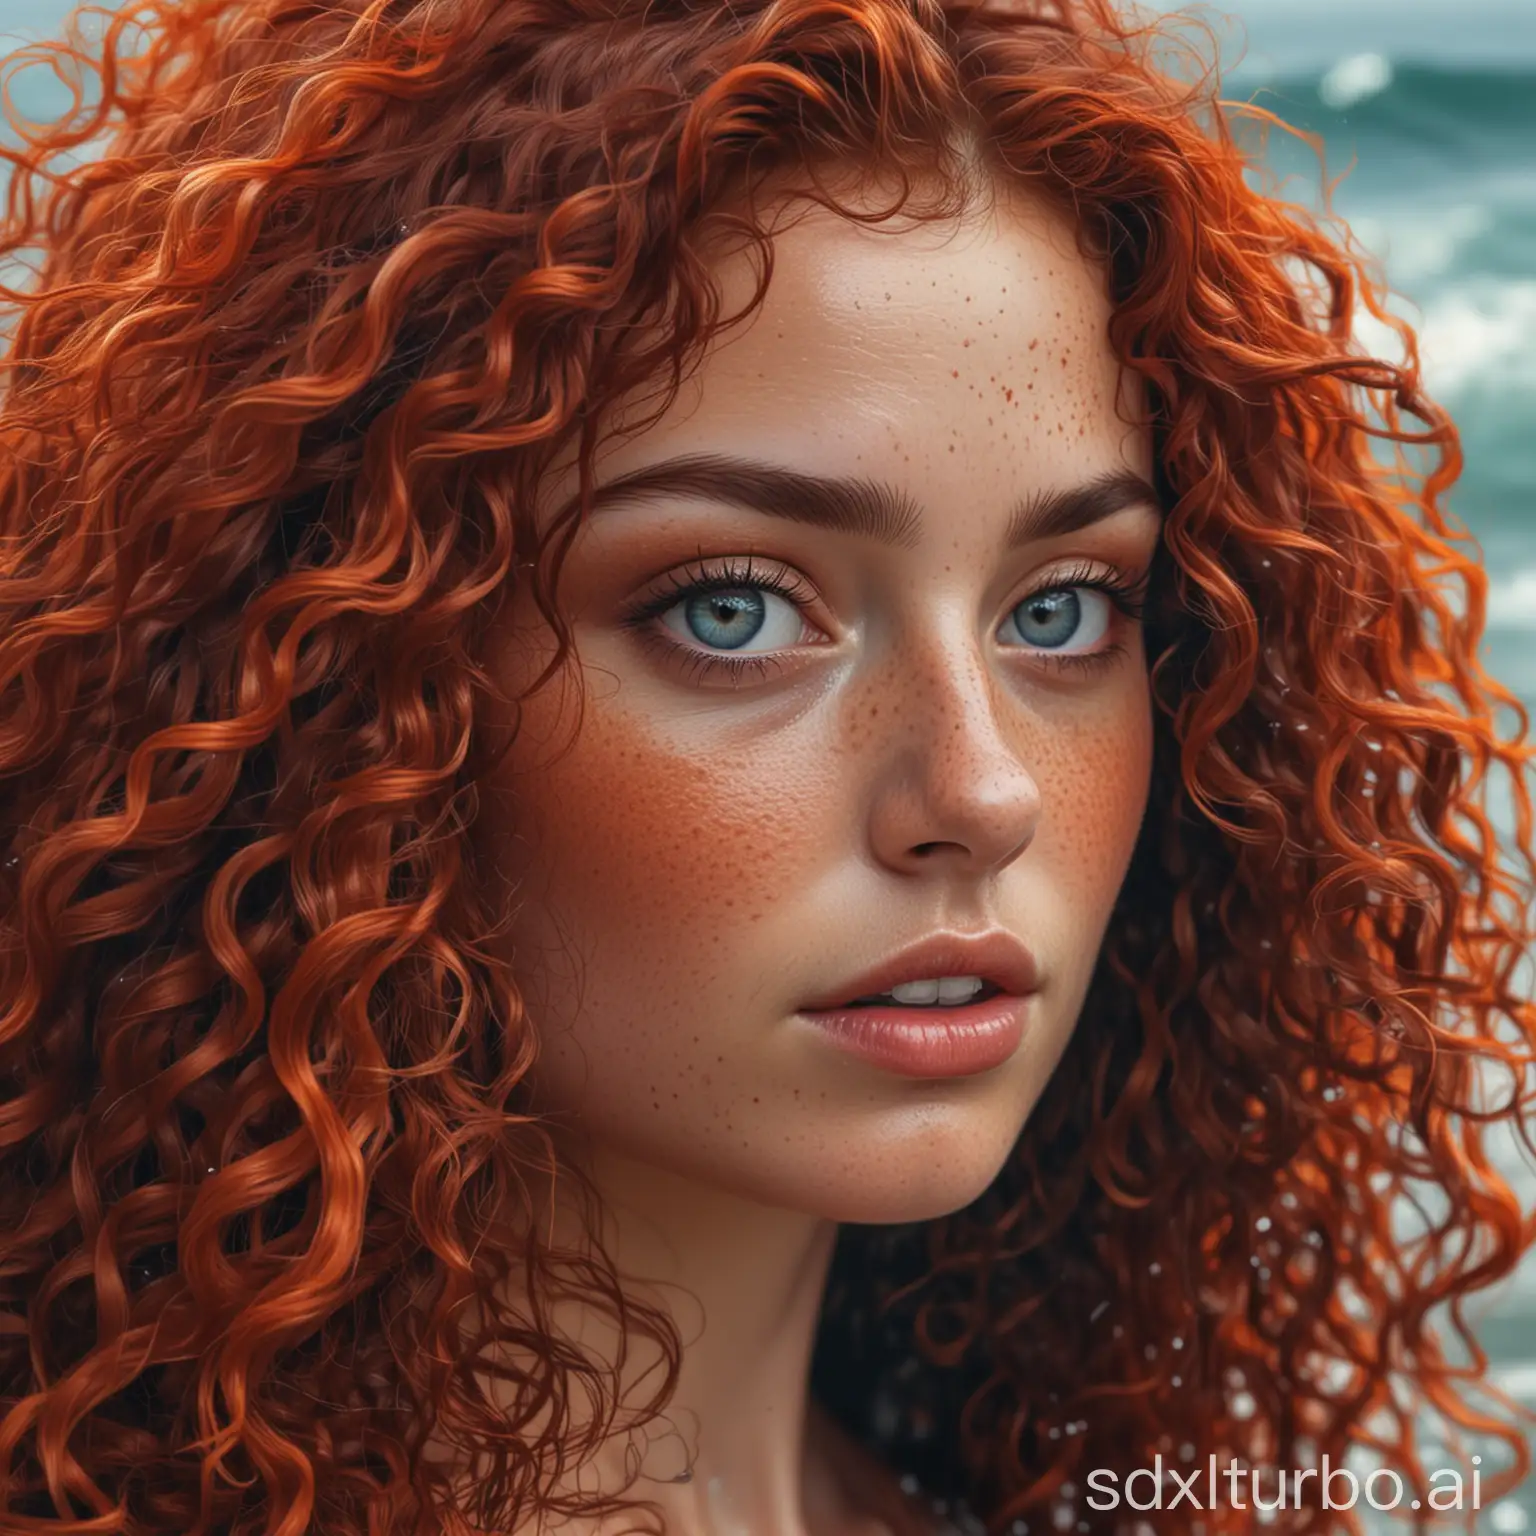 Hyperrealistic-Portrait-of-a-Freckled-Woman-with-Fiery-Red-Hair-by-the-Ocean